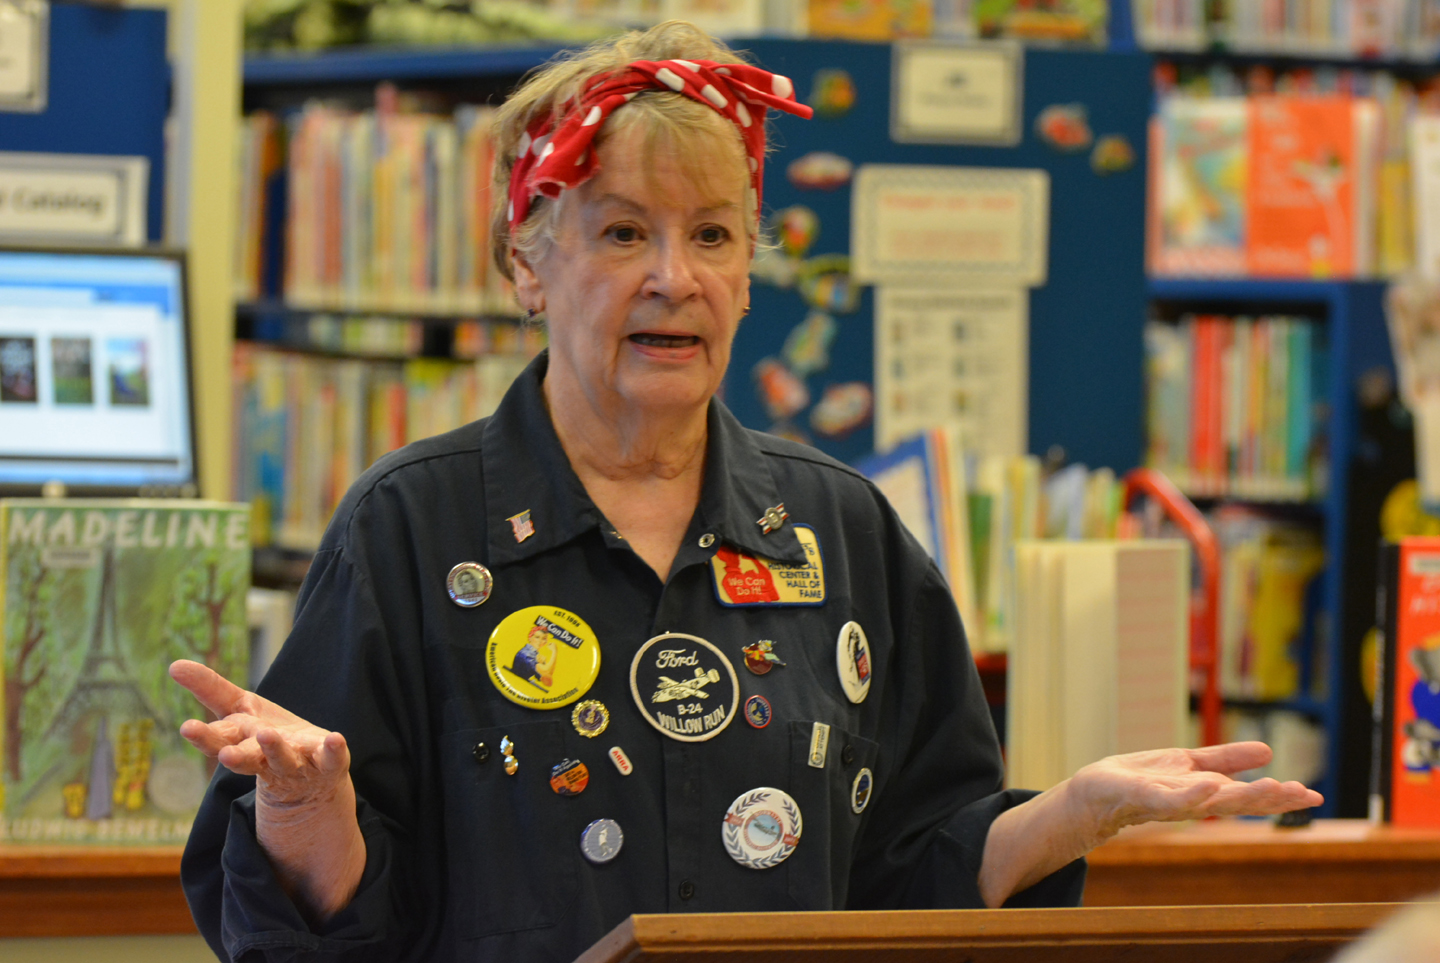 Donnaleen Lanktree, president of the American Rosie the Riveter Association, visited the Addison Twp. Public Library. Photo by C.J. Carnacchio.